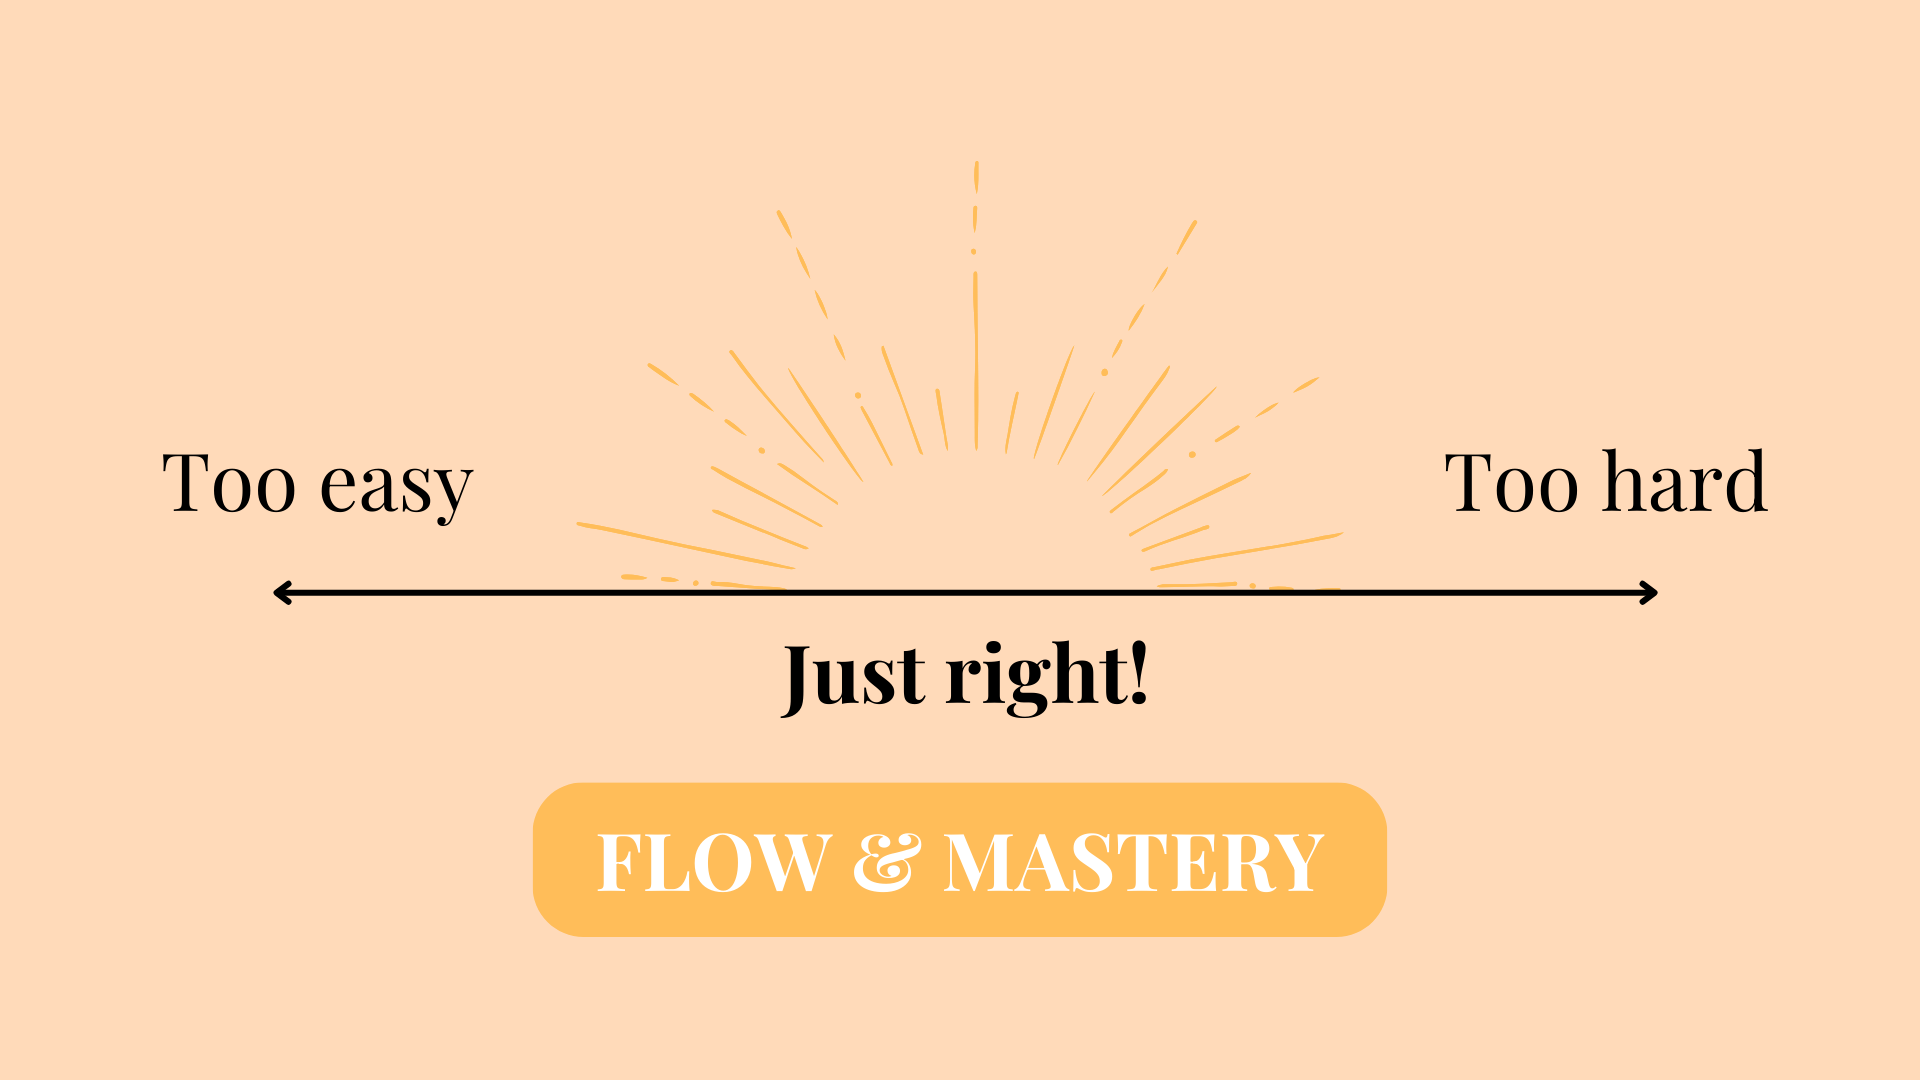 goldilocks tasks - when tasks are in the sweet spot of difficulty, i.e. not too easy and not too hard, but just right, you achieve flow and mastery